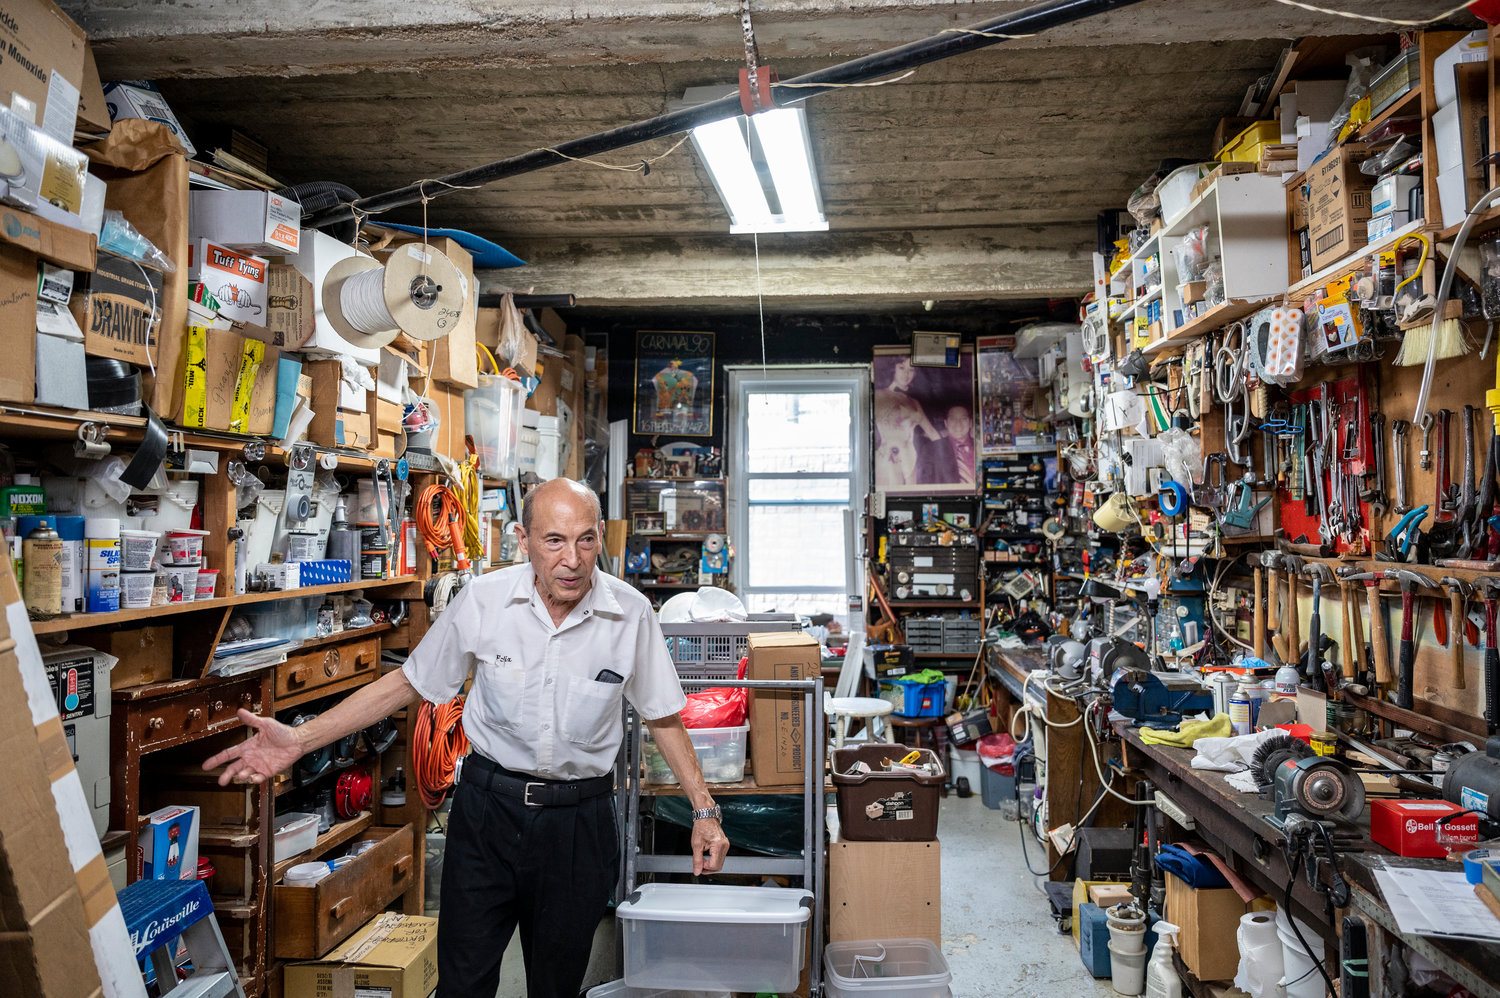 Felix Lam has spent the past 50 years as superintendent of 2465 Palisade Ave., in Spuyten Duyvil. He has his own workshop in the basement where he keeps his tools.